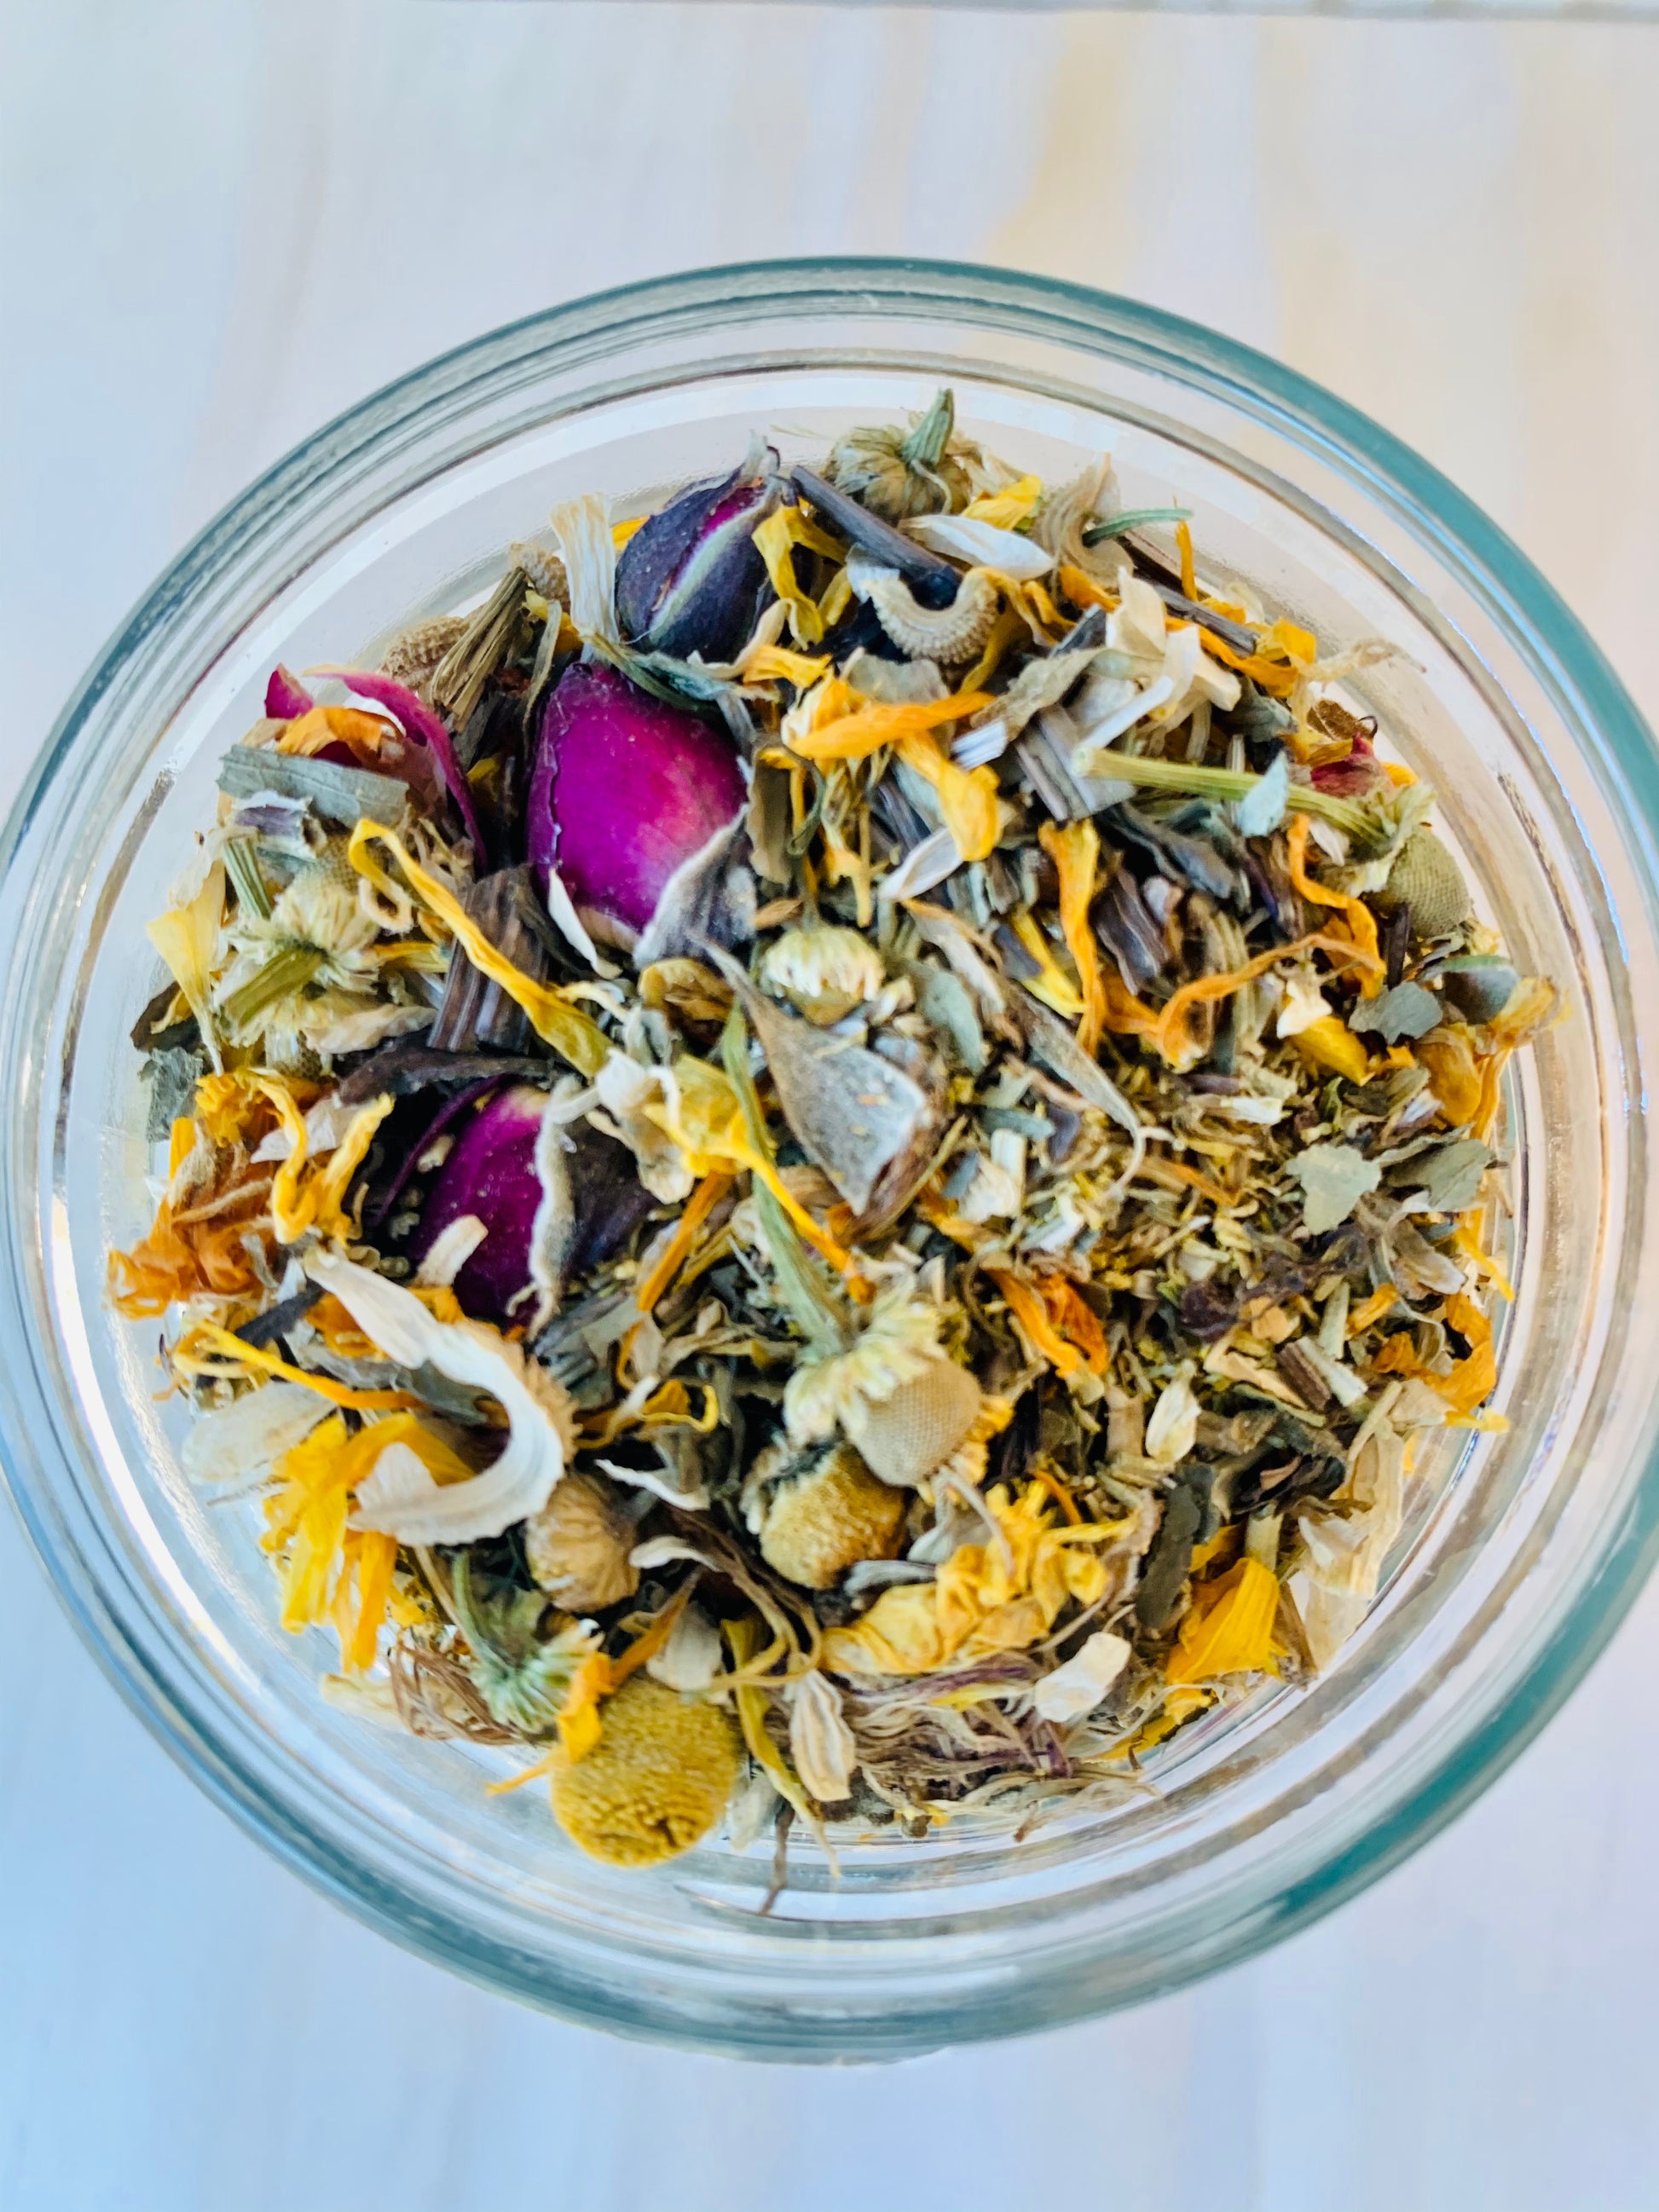 Herbal Intimate Tea & Steam - For Facial, Respiratory, & Yoni, Effervesce.ItsJustBubbles, , herbal-intimate-tea-steam-for-facial-respiratory-yoni-steam, bath, body, face, herb, home, vegan, y